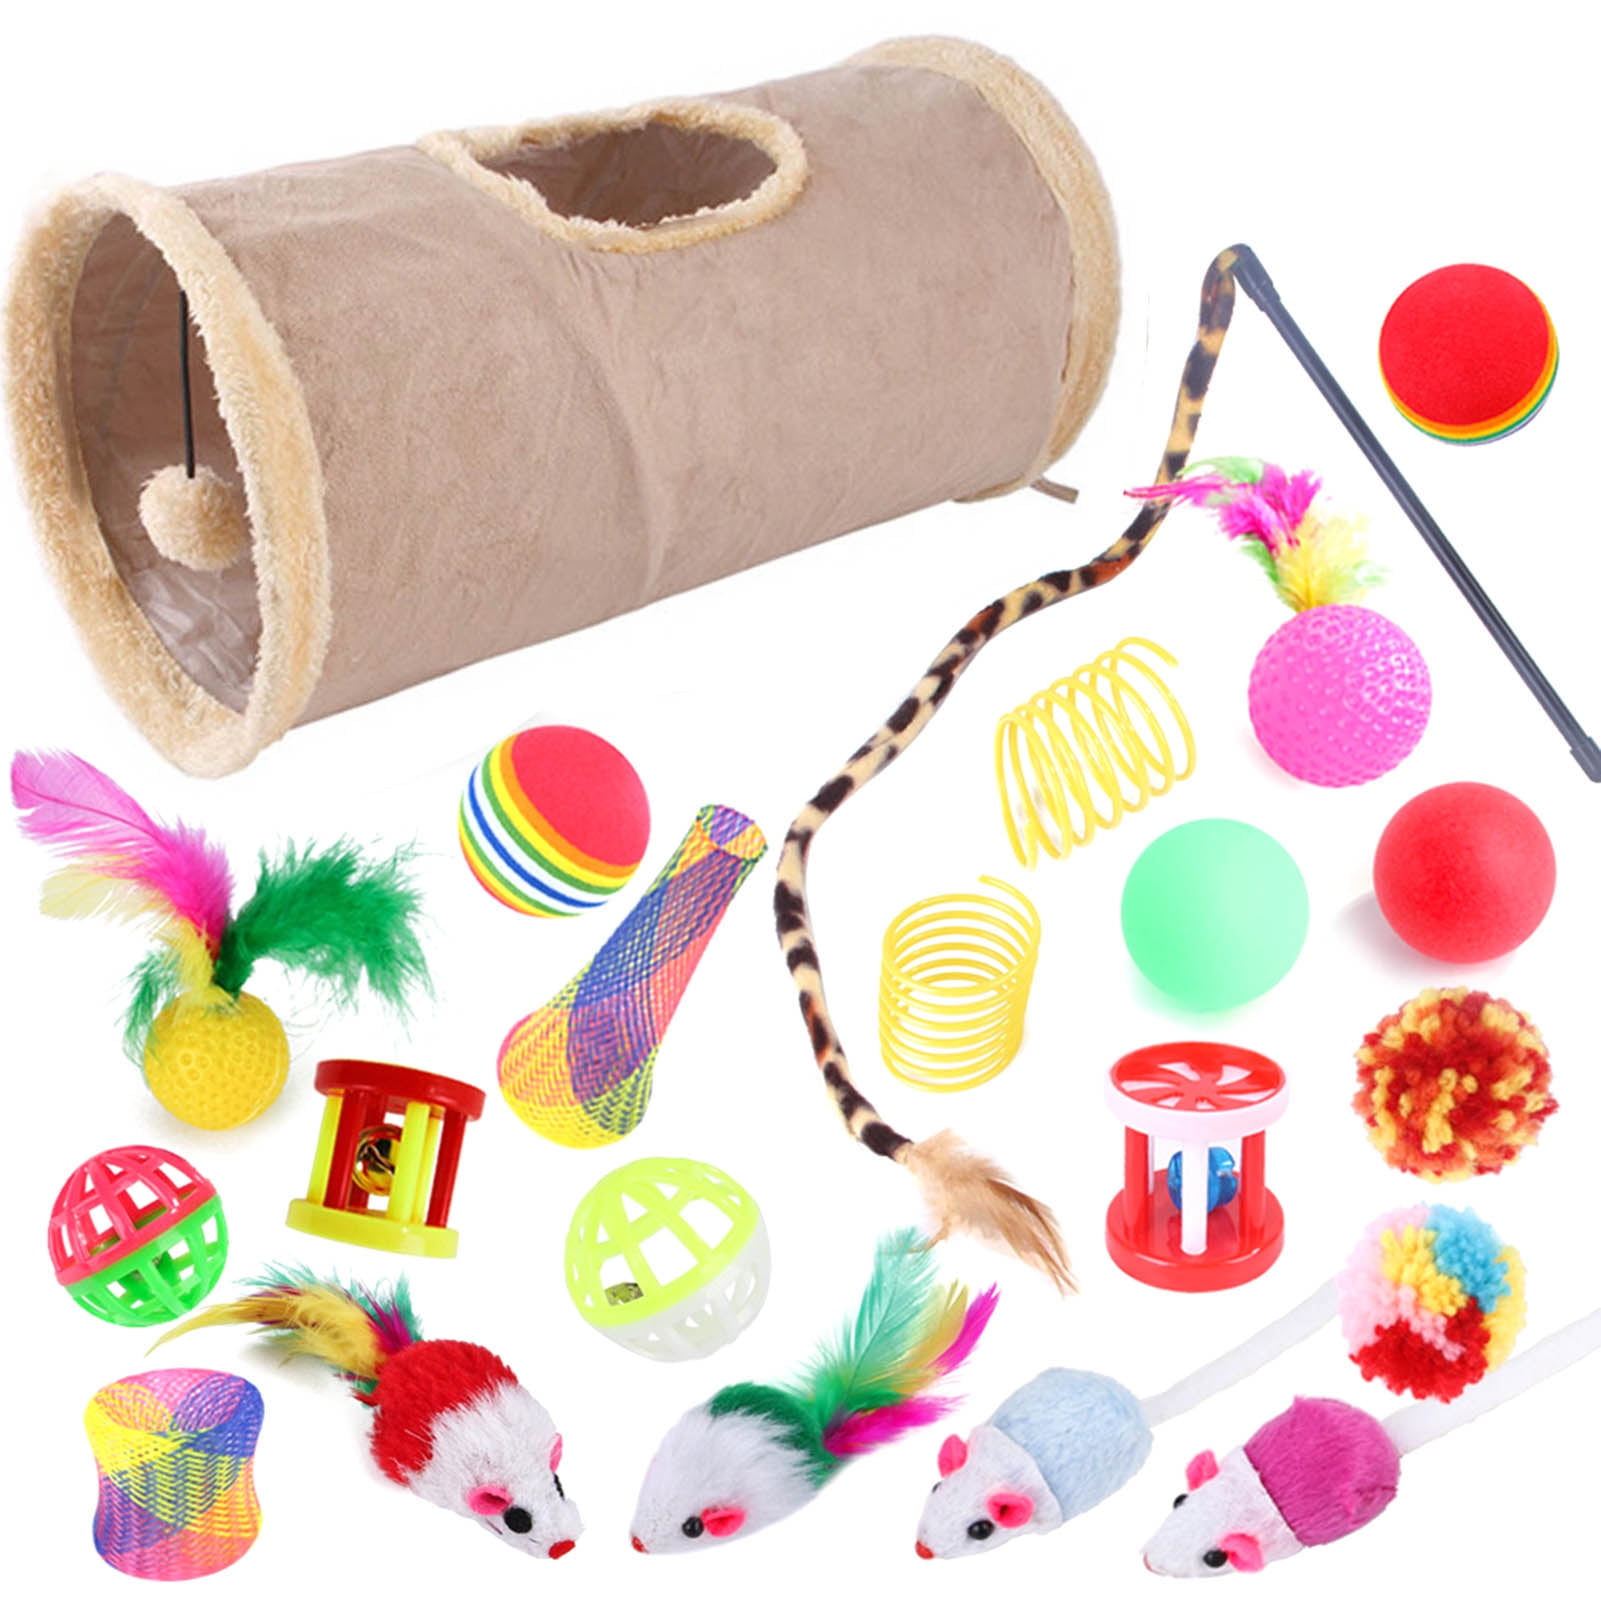 Oziral Cat Toys Set 32 PCS Kitten Toys Assortments Including 2 Way Rainbow  Tunnel Cat Feather Teaser Wand Sisal Mice Bell Balls Crinkle Balls